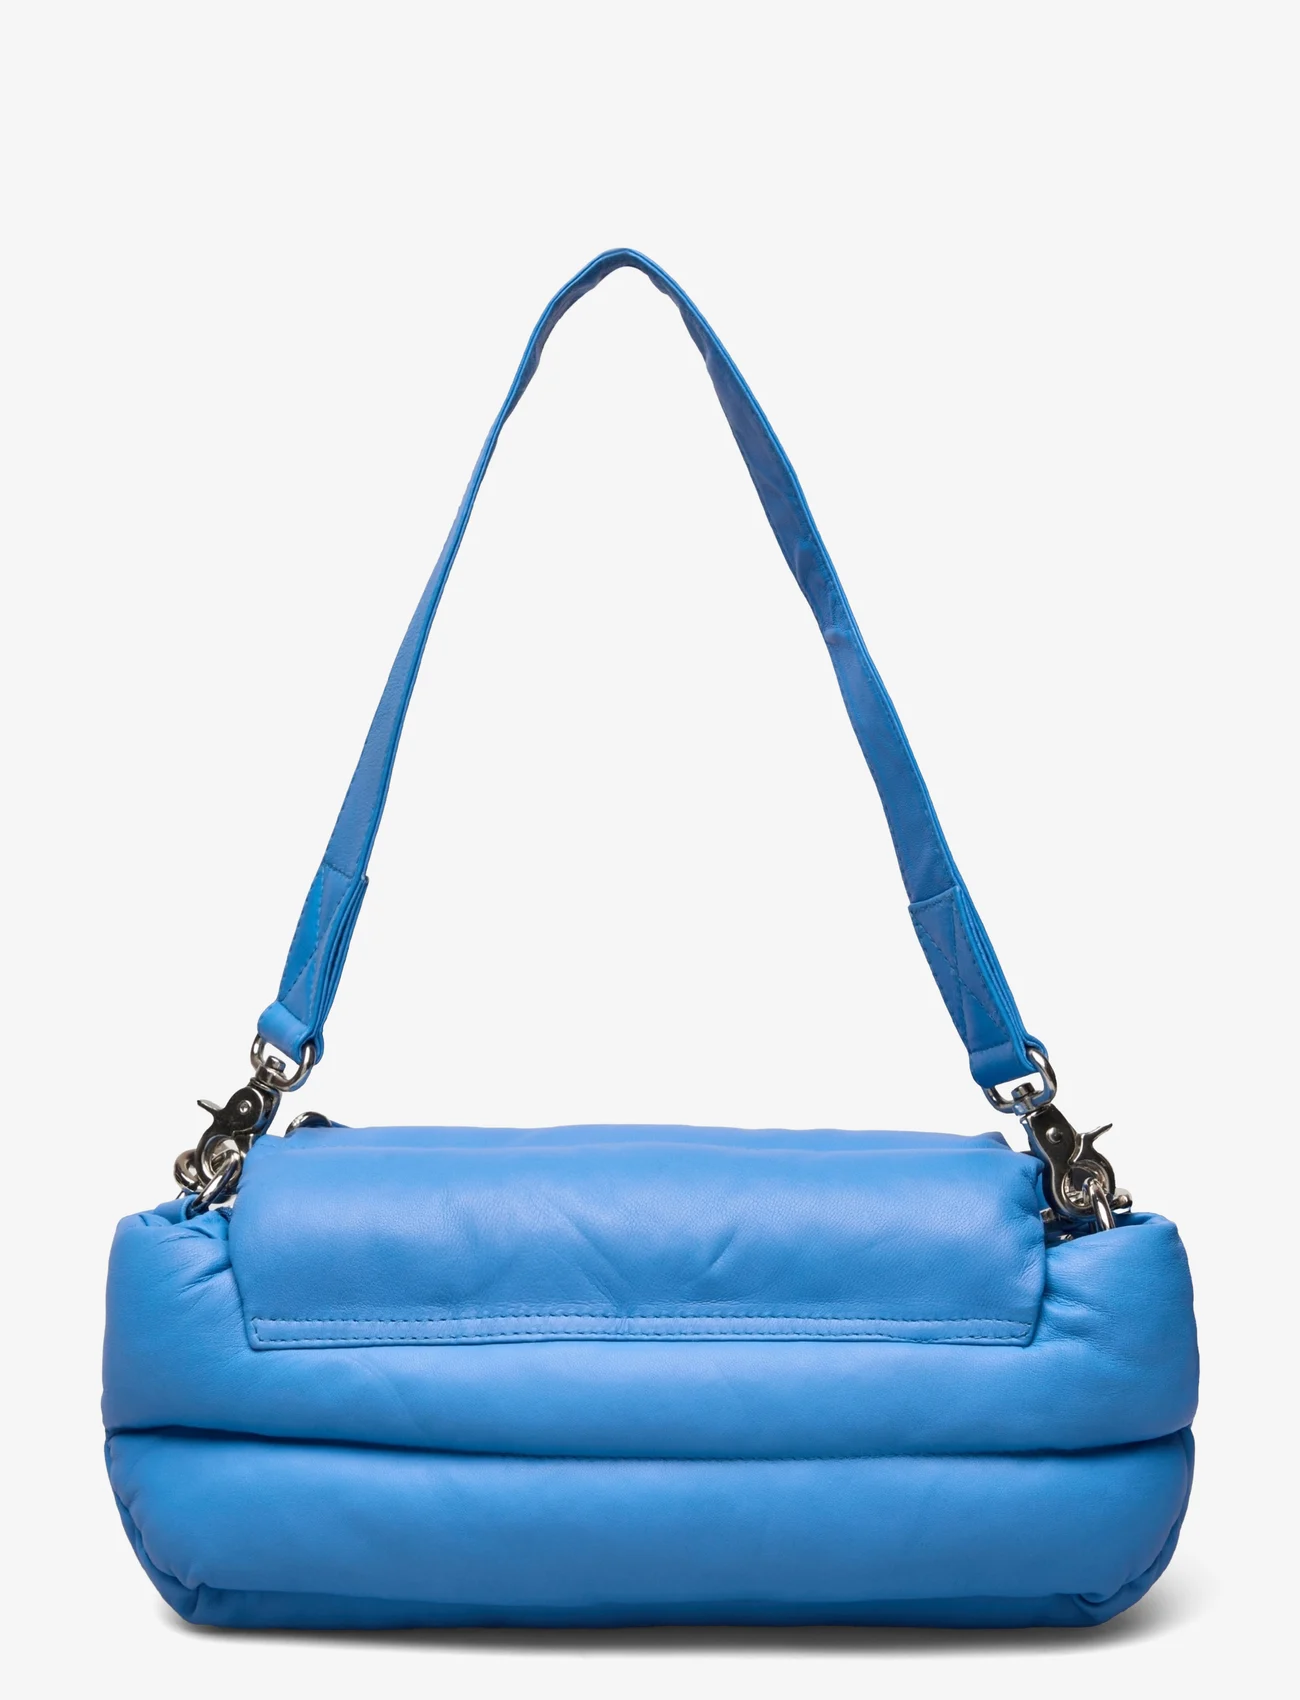 DEPECHE - Small bag / Clutch - shoulder bags - 209 french blue - 1